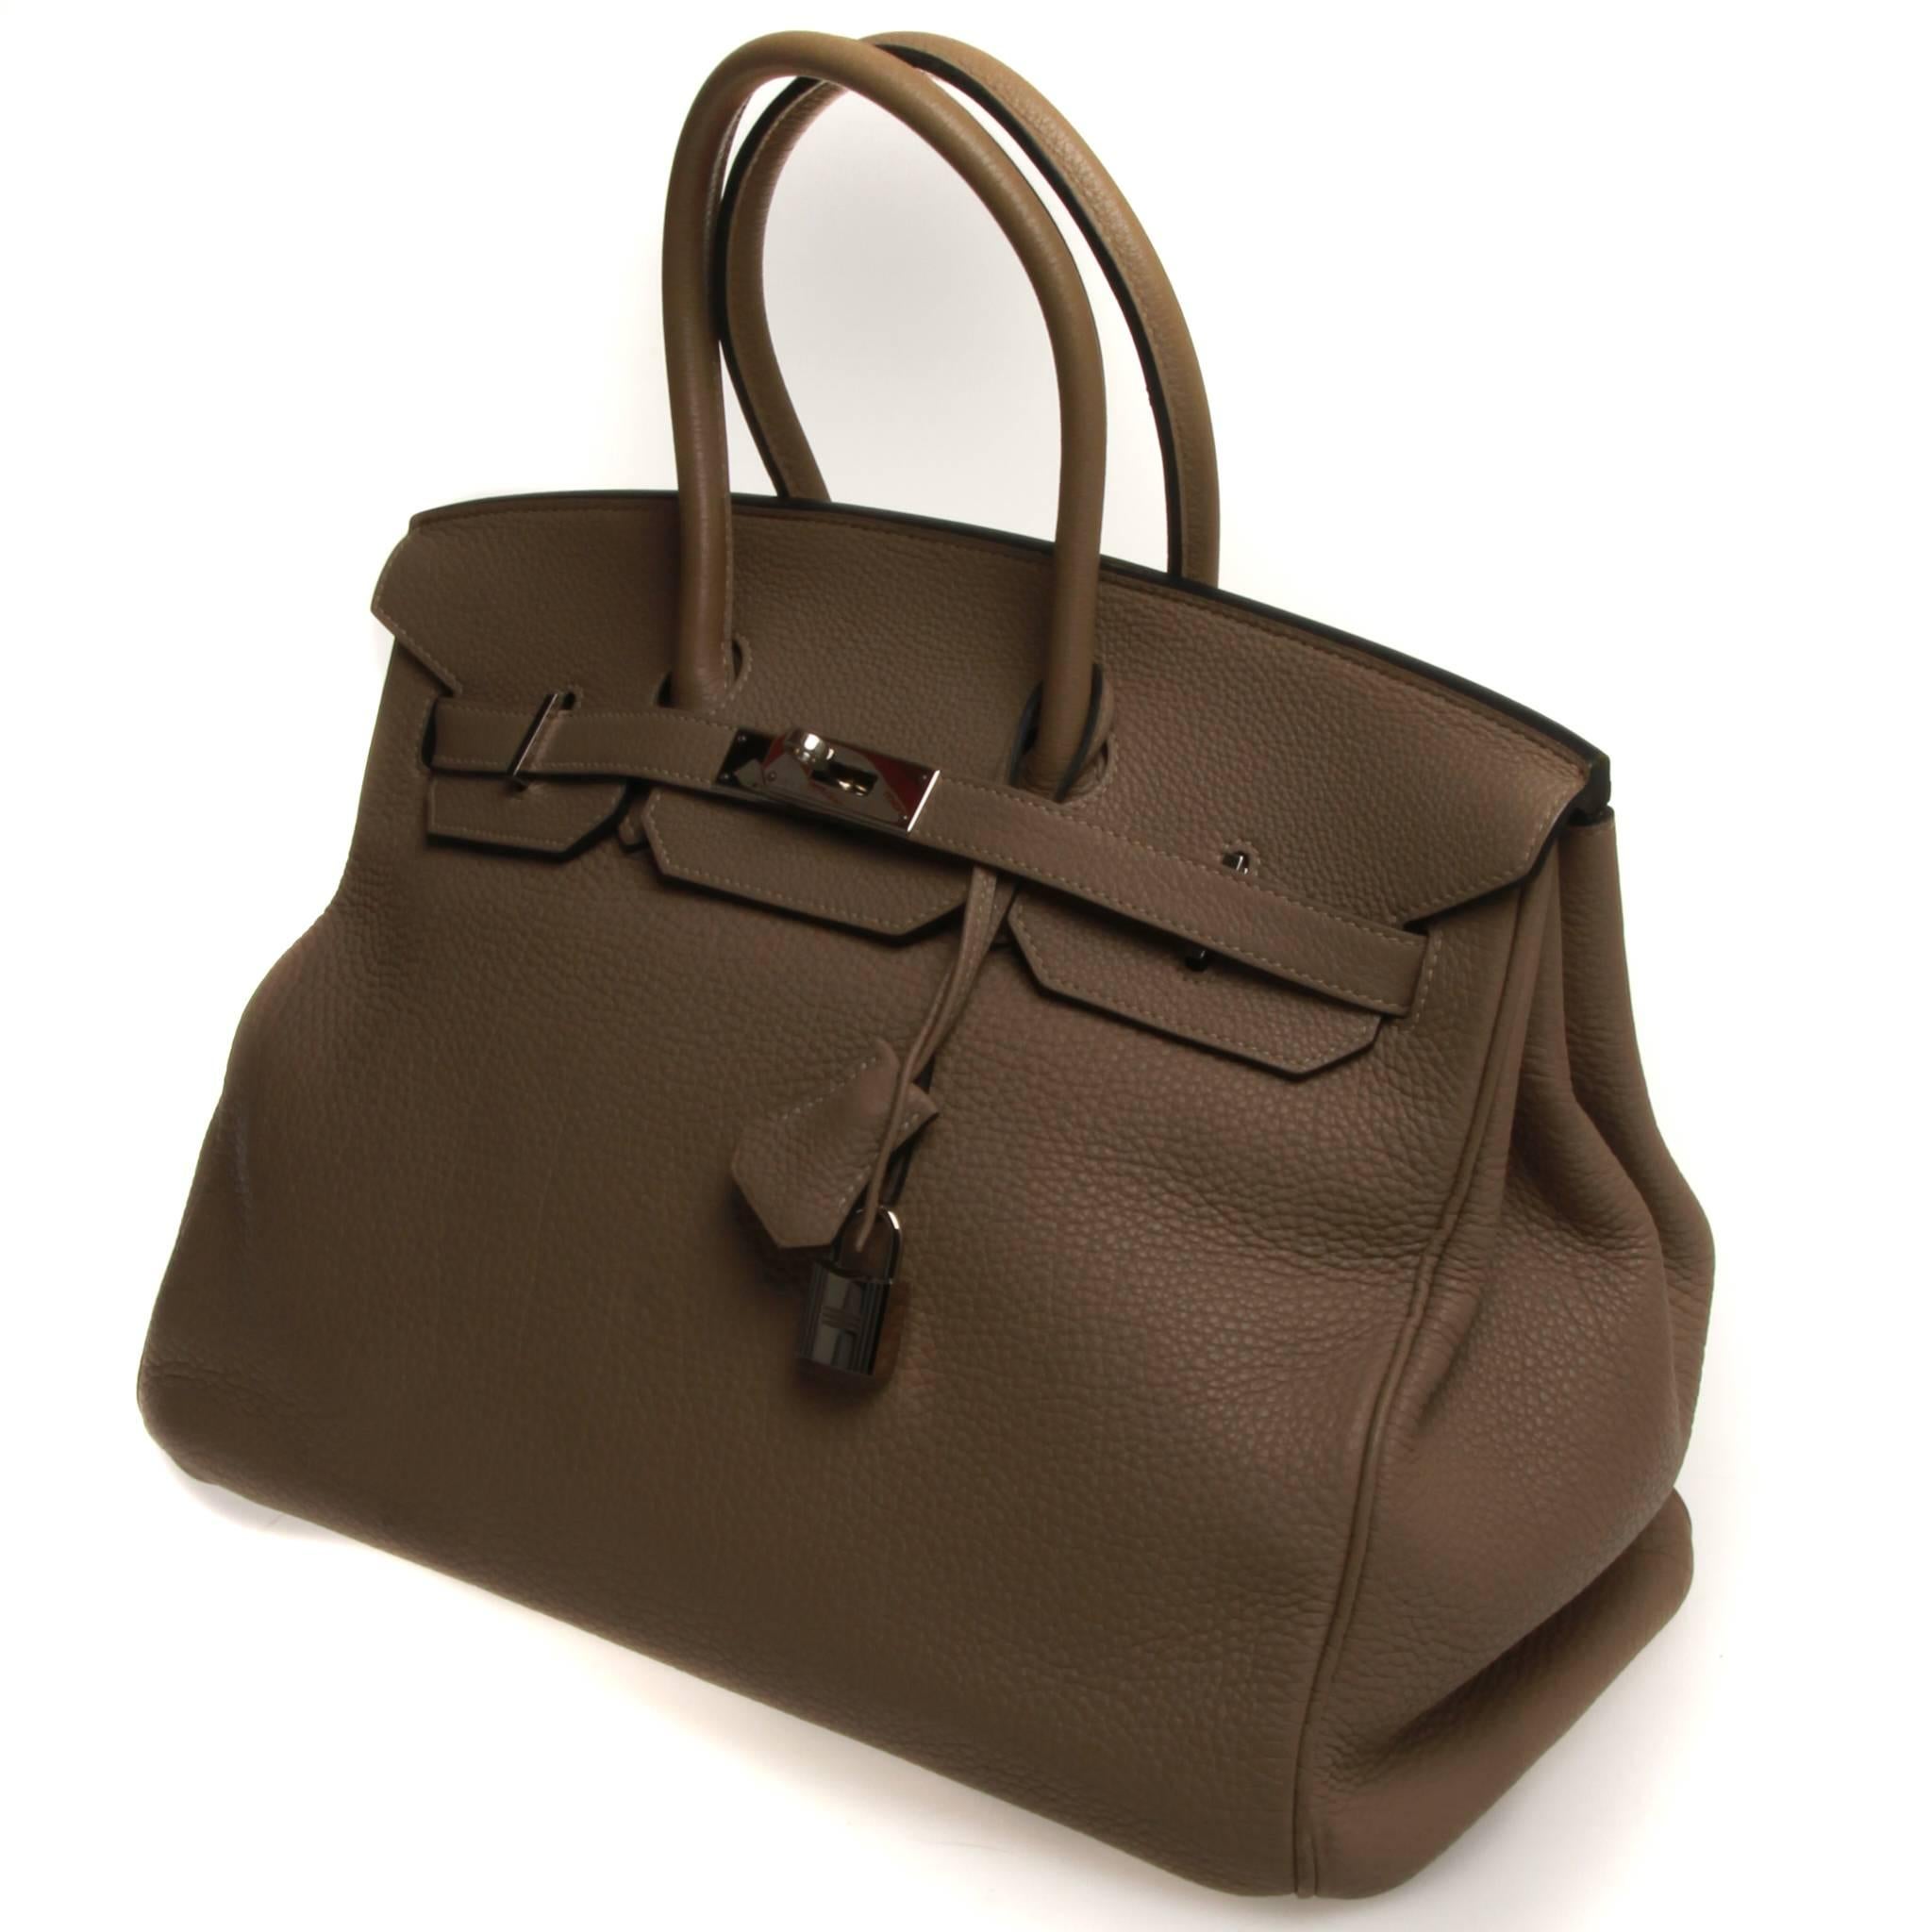 Etoupe Togo leather Hermès Birkin 35 with palladium-plated hardware, dual rolled handles, tonal leather interior, dual pockets at interior walls; one with zip closure and flap with turn-lock closure at front. Blind stamped O in a square denoting